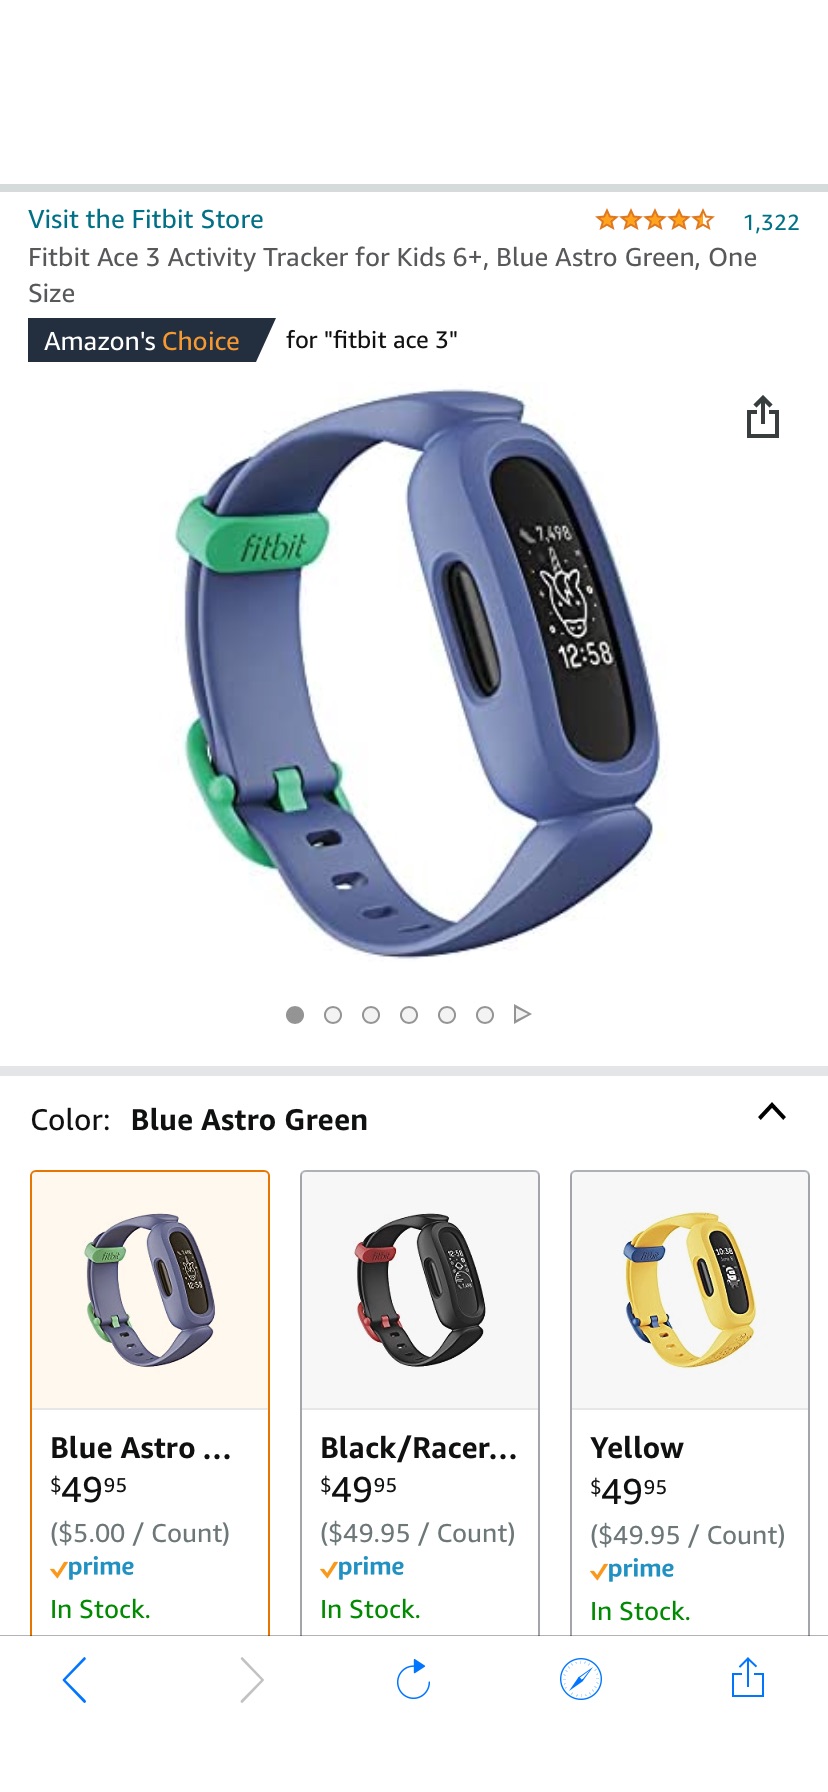 Amazon.com: Fitbit Ace 3 Activity Tracker for Kids 6+, Blue Astro Green, One Size : Sports & Outdoors 儿童运动腕表